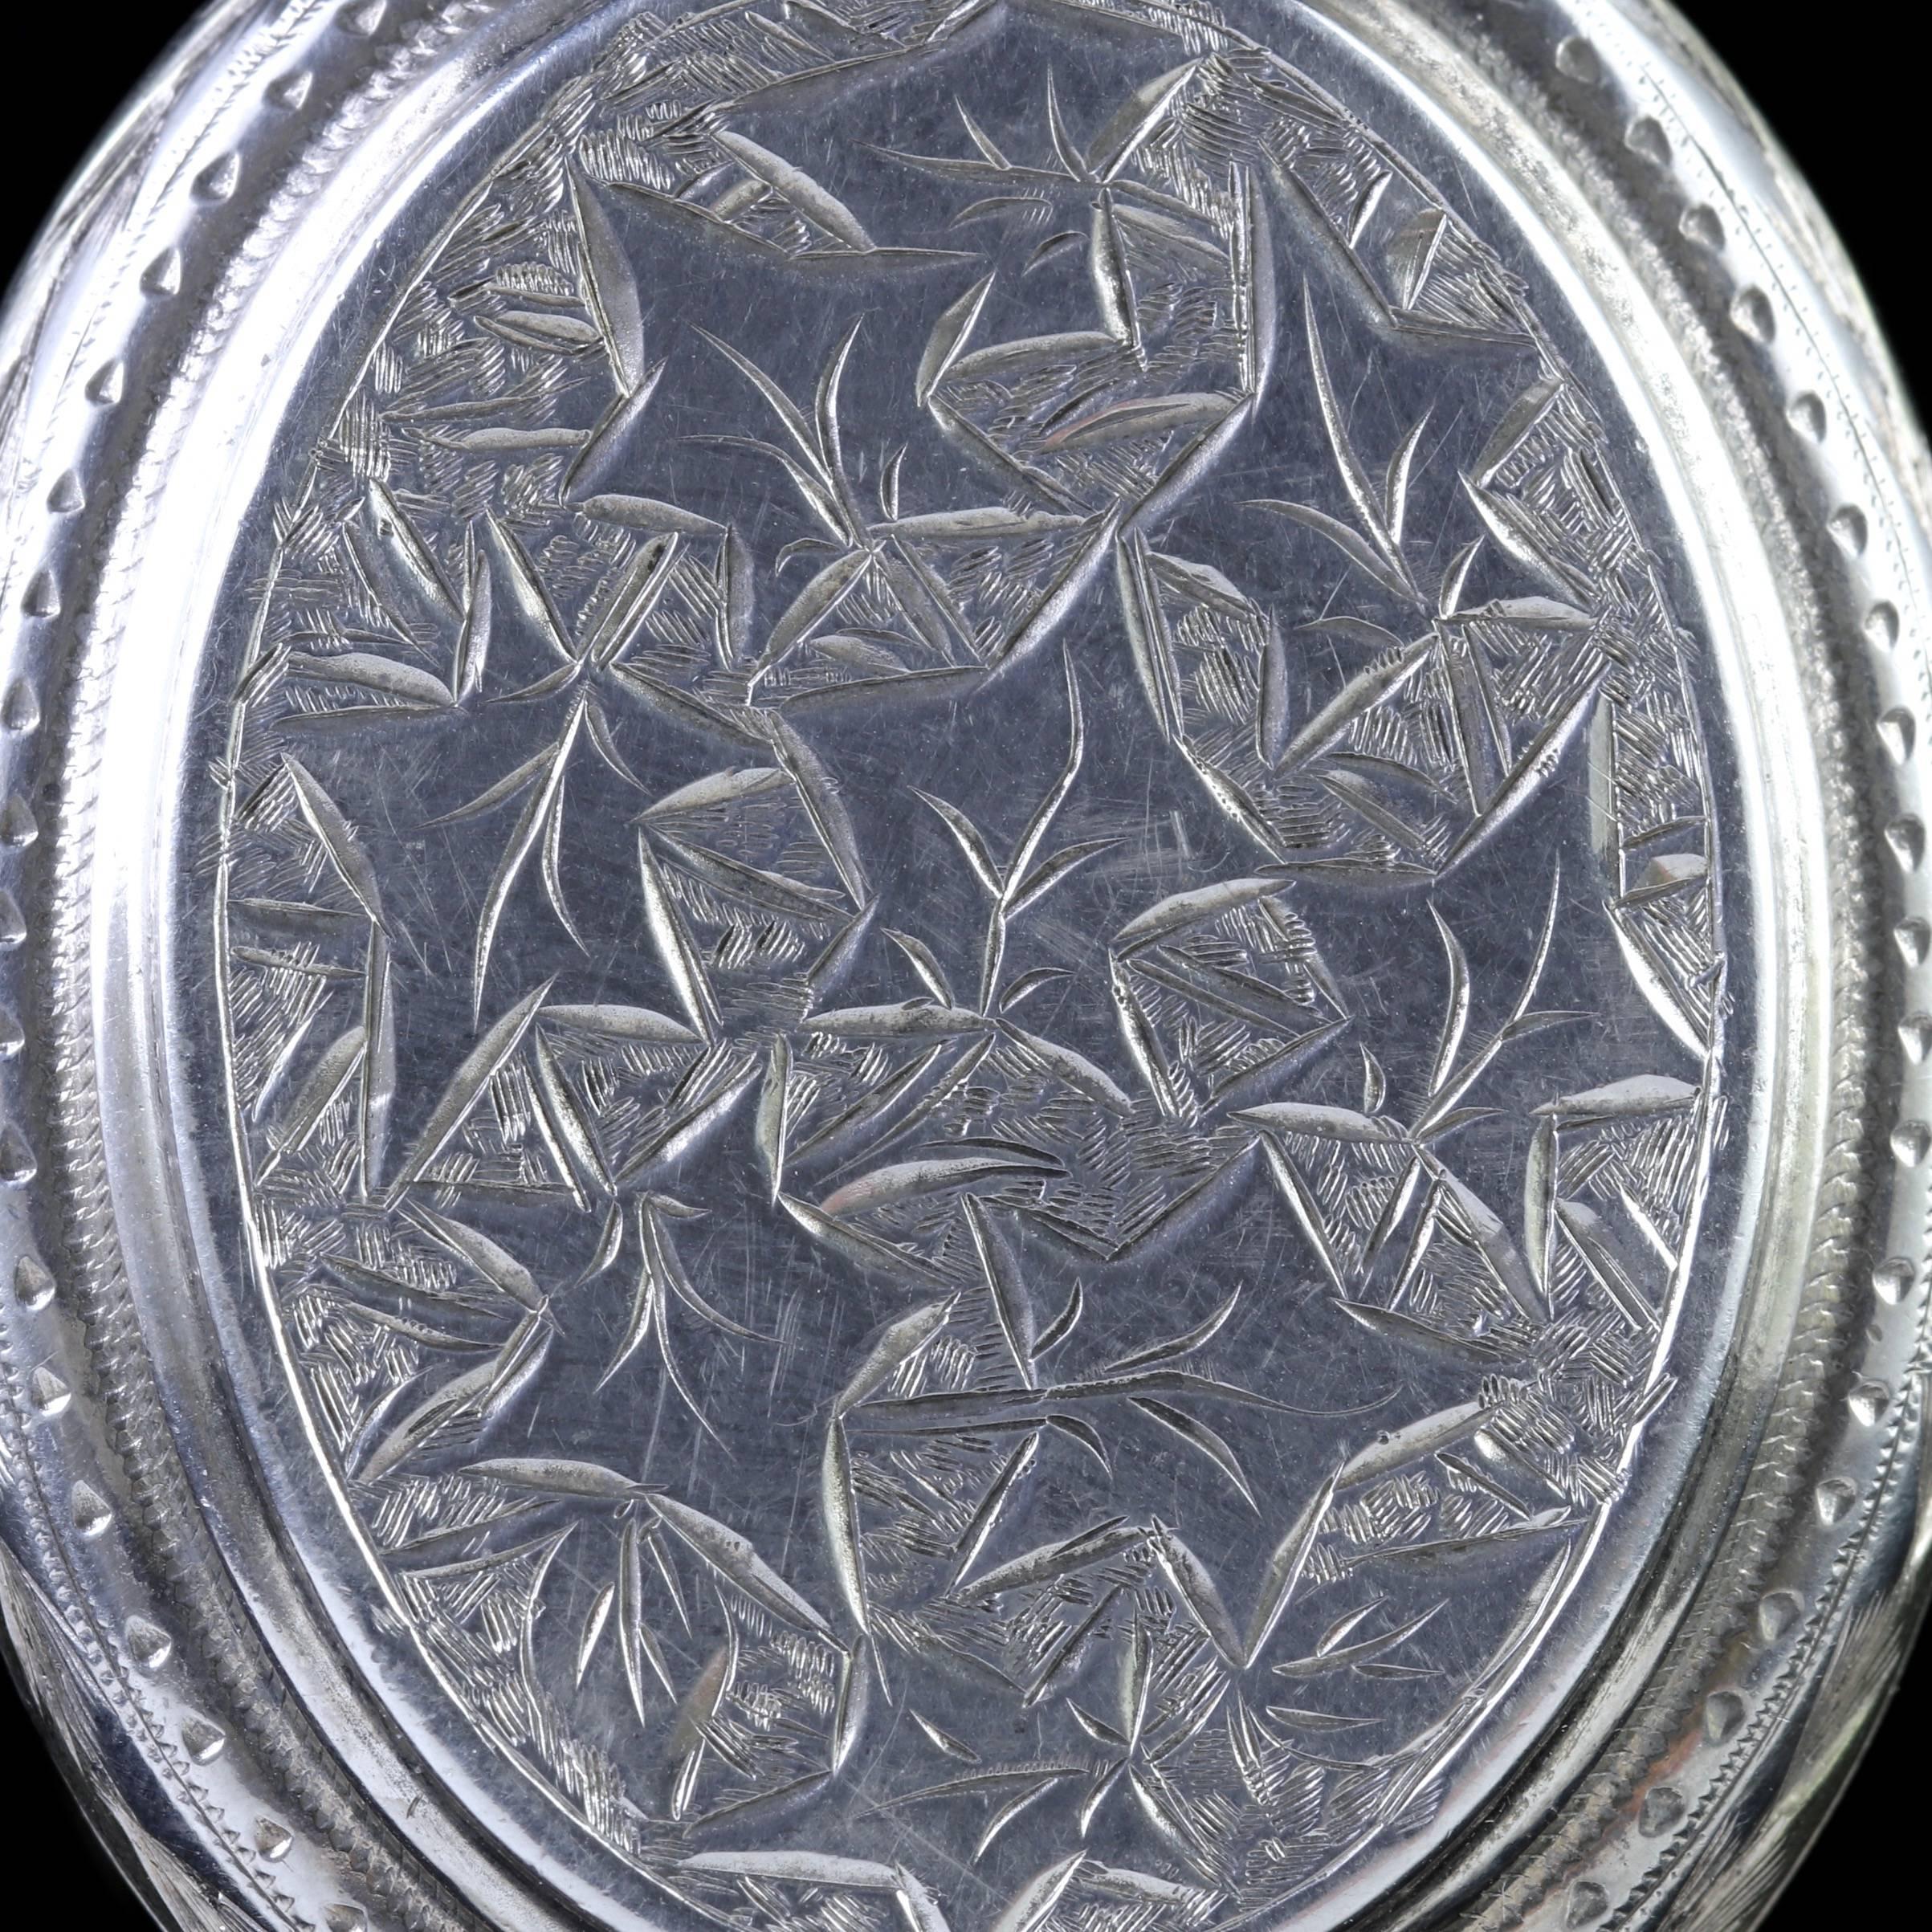 To read more please click continue reading below-

This fabulous antique Sterling Silver engraved Ivy locket is Circa 1880.

The wonderful locket is beautifully engraved with foliate motifs and detailed Ivy which represents a loving eternal